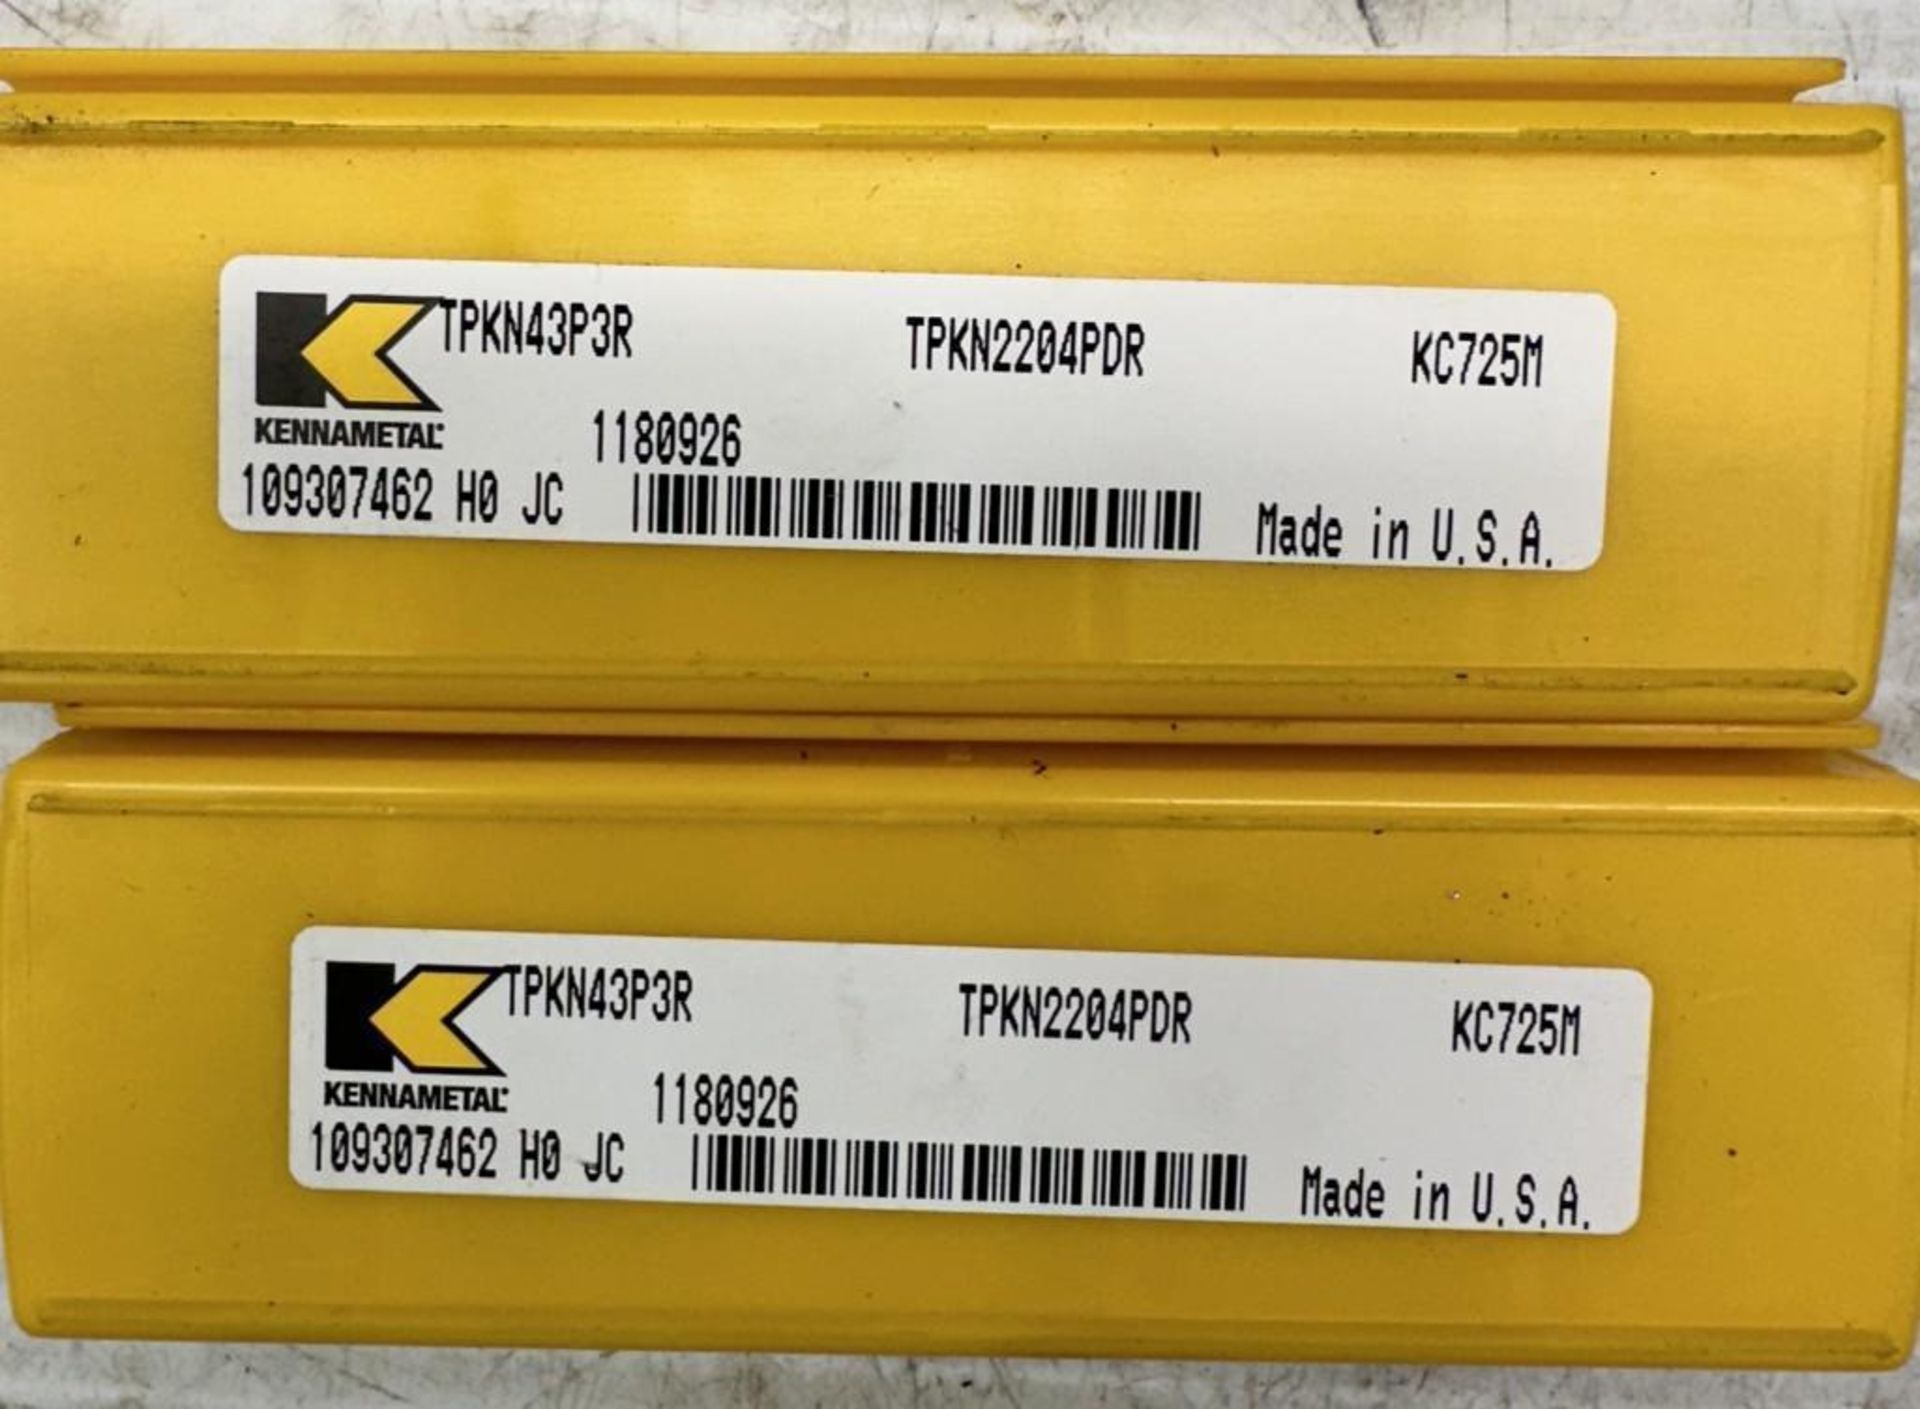 Lot of Kennametal #TPKN43P3R Carbide Inserts - Image 3 of 3